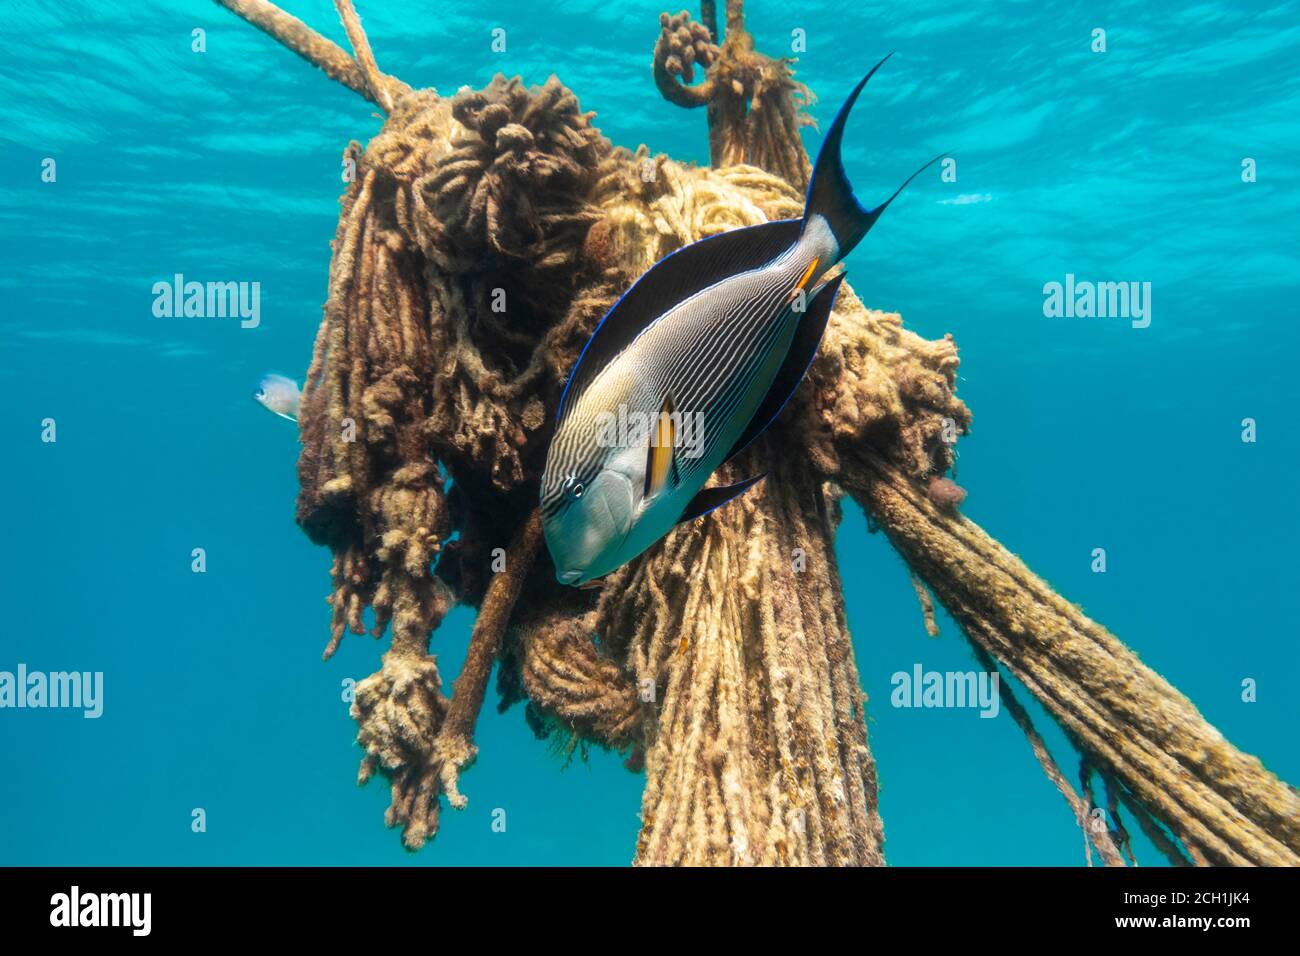 Arabian Surgeonfish (Acanthurus Sohal) in Red Sea Swimming near Old Rope. Beautiful Tropical Coral Reef Fish with Yellow Fins, Blue Stripes in the Oce Stock Photo